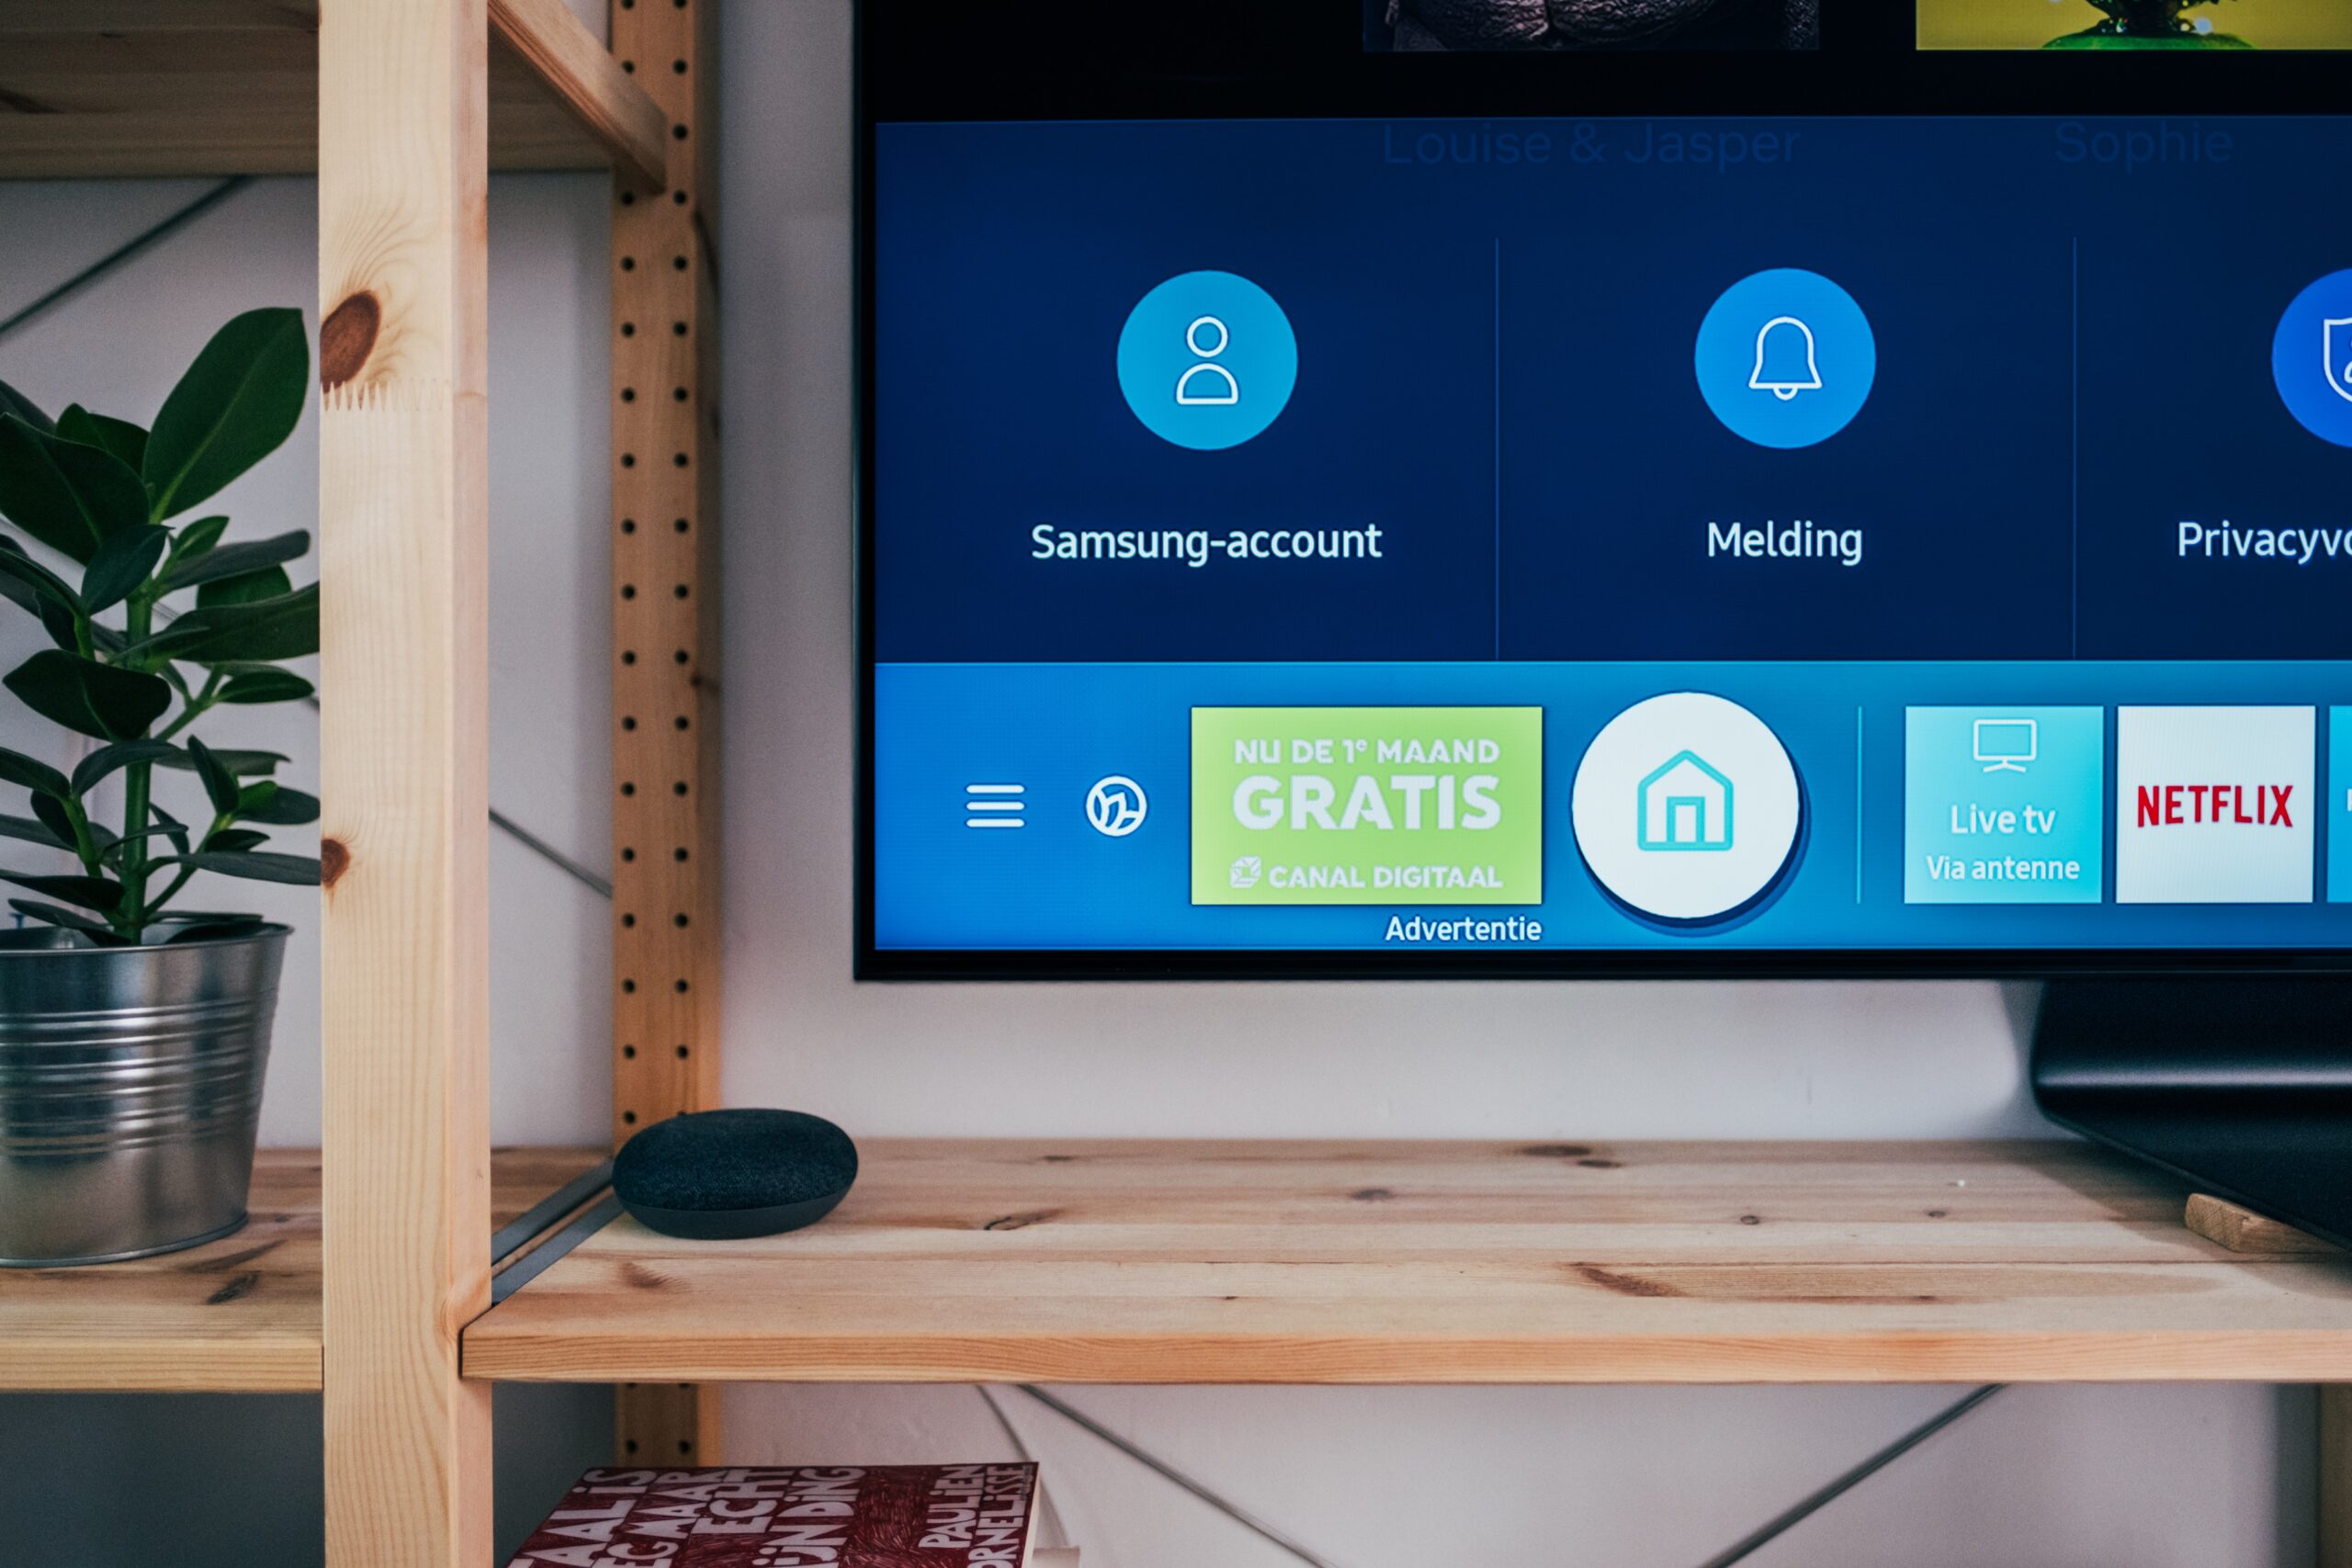 got a whole lot easier for Portland residents! Finding the great services available to get your TV professionally mounted so that you can enjoy